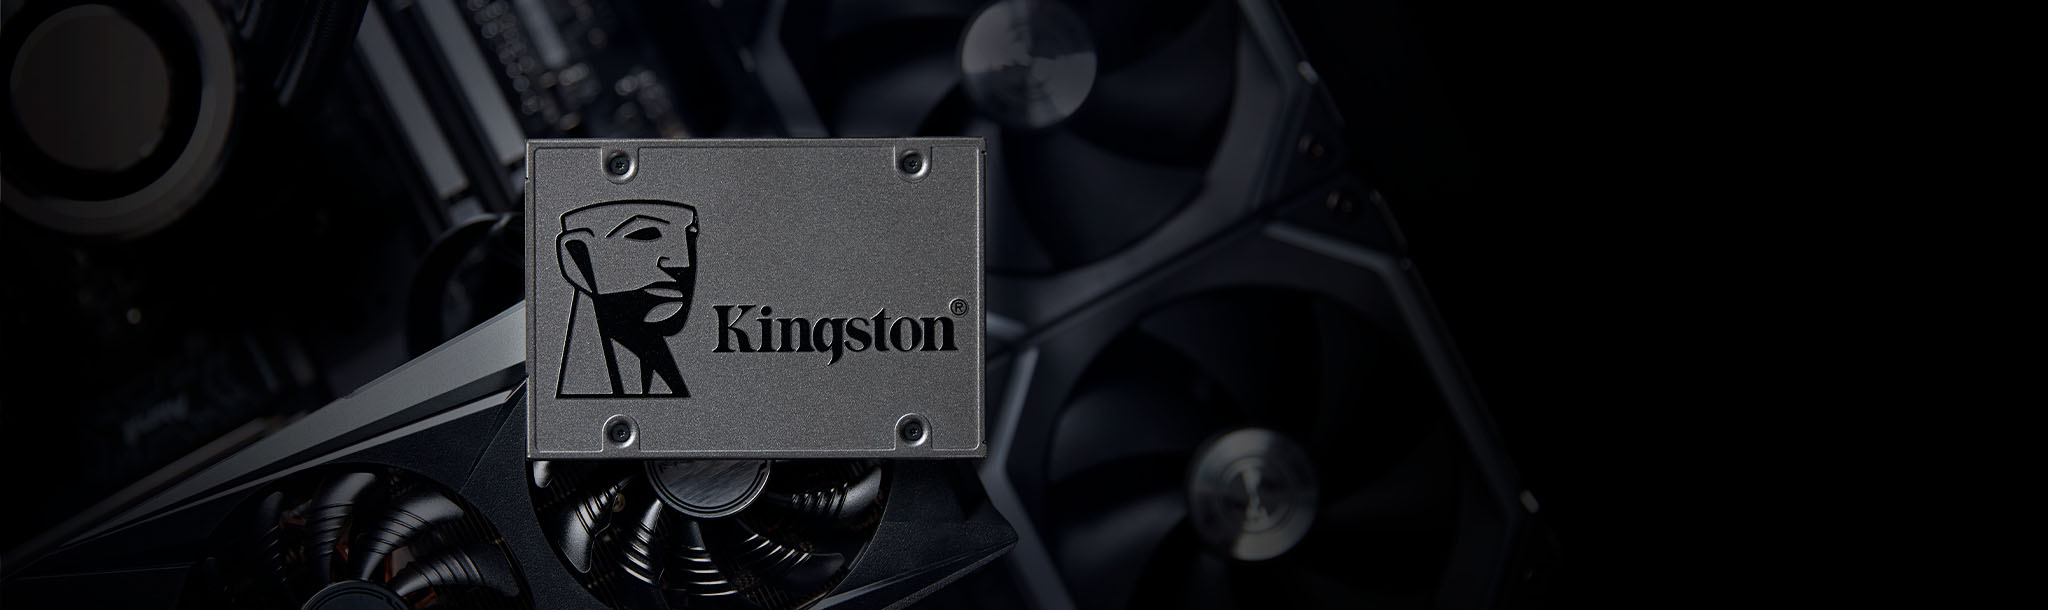 A400 Solid State Drive – 120GB–1.92TB - Kingston Technology